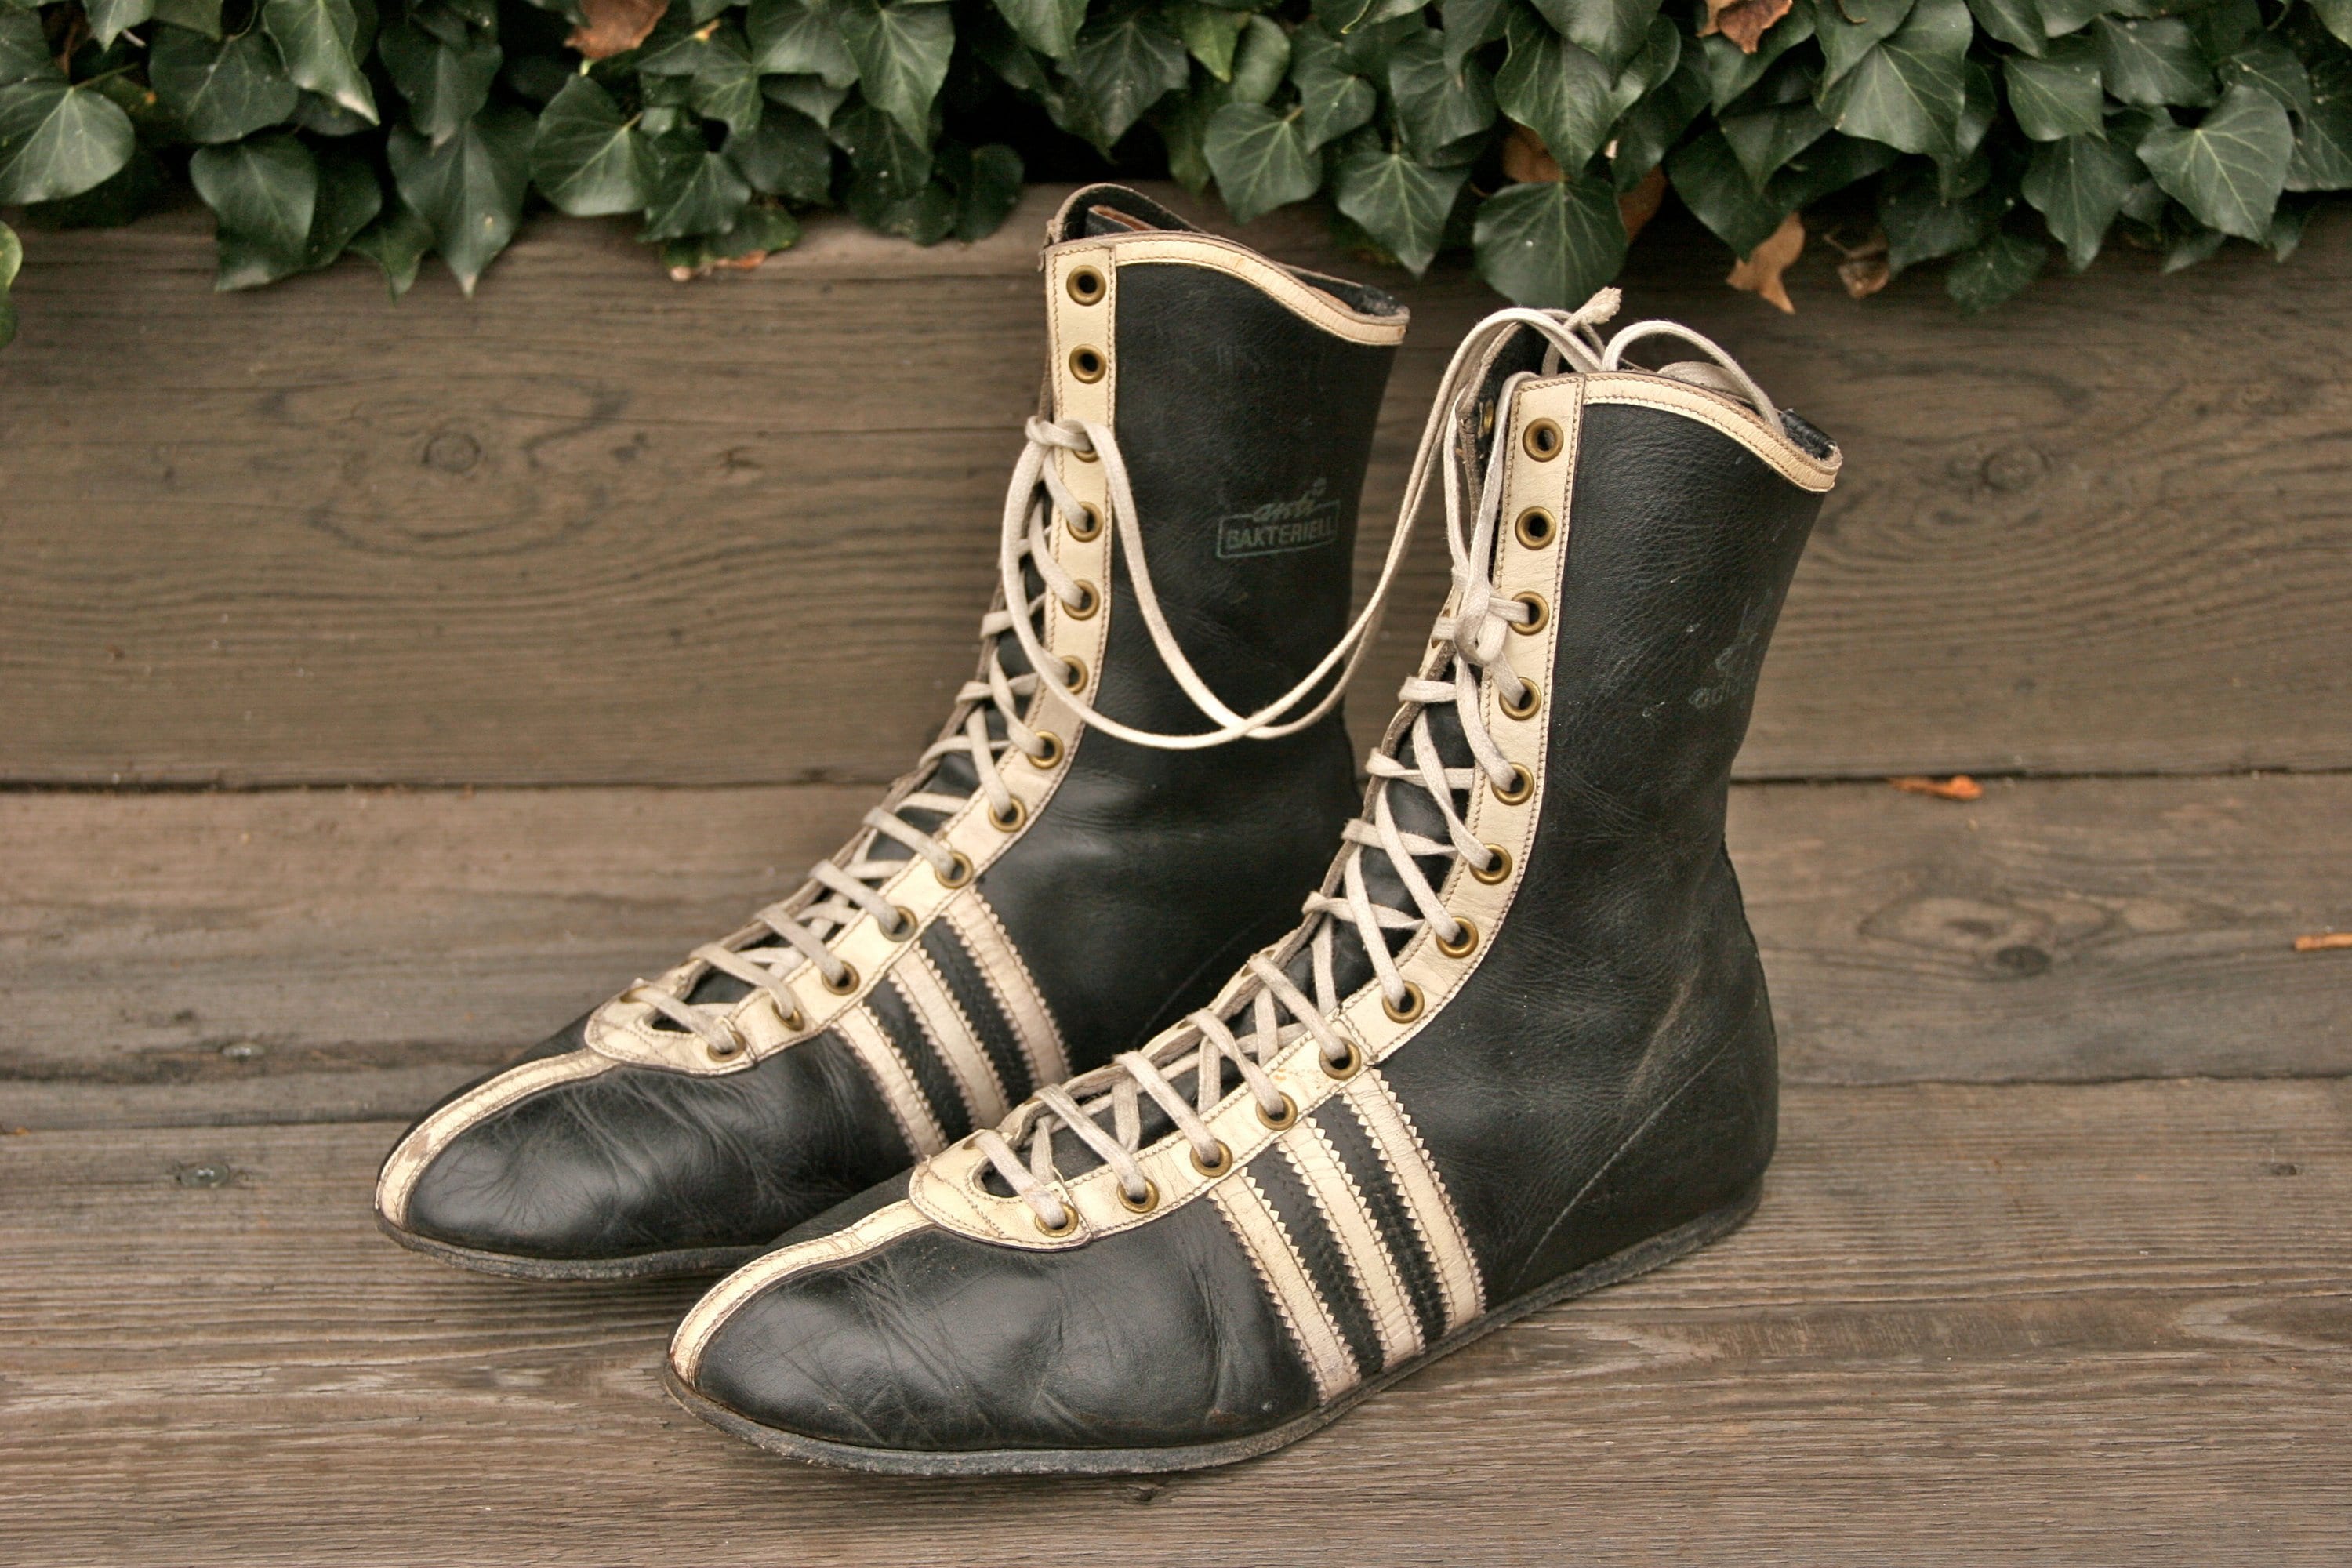 Vintage Adidas Boxing Shoes Aprox. 1960th - Etsy